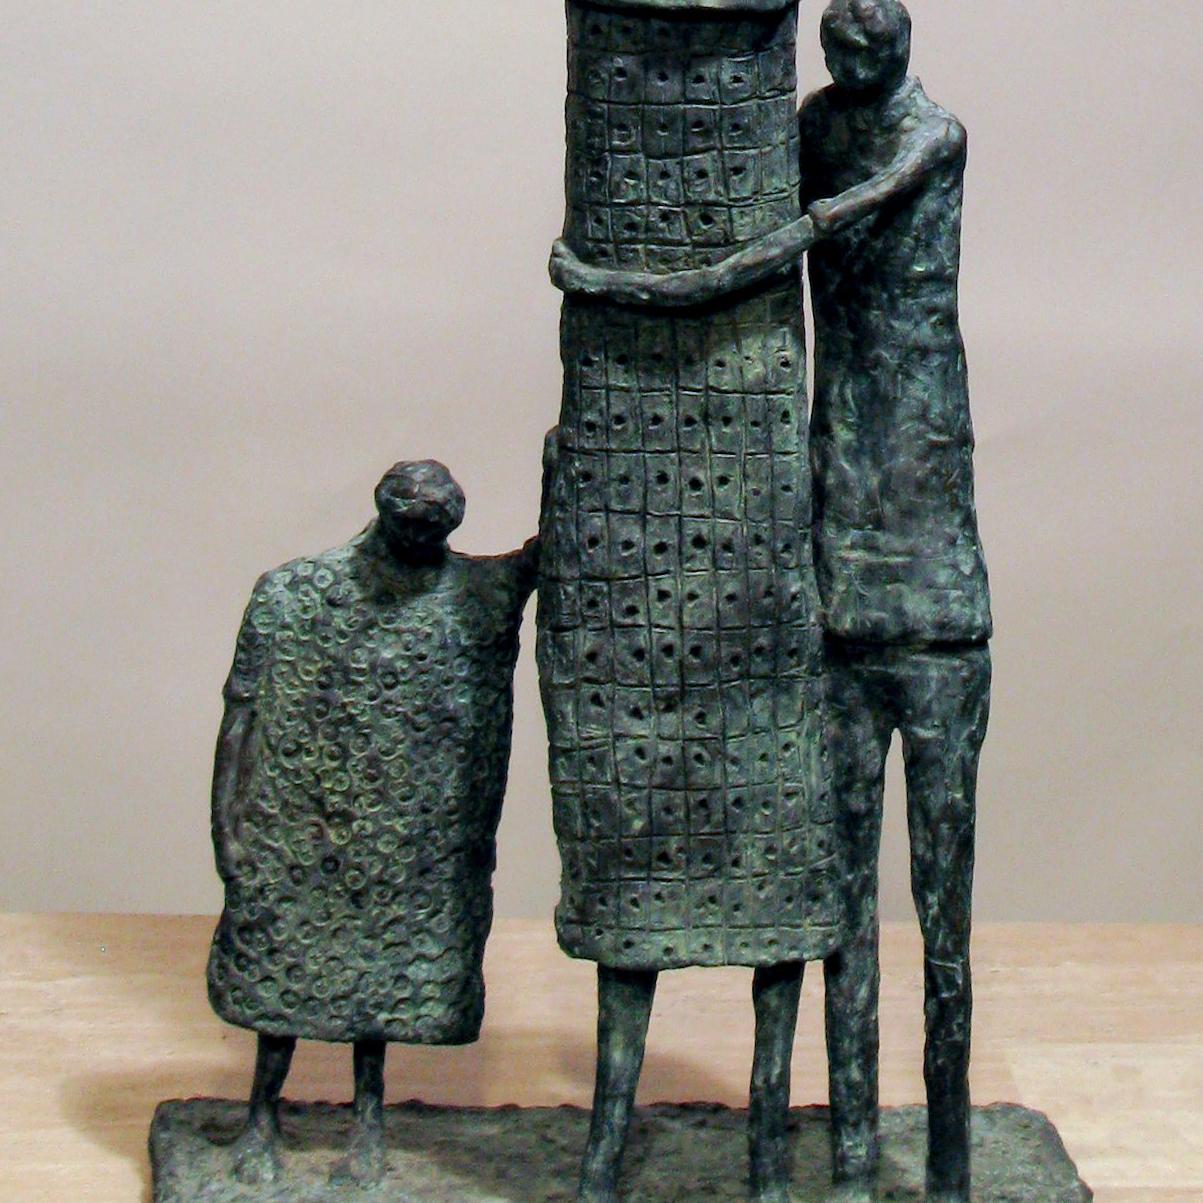 Leche by Eduardo Oropeza, limited bronze edition 25 , children, baby, mother, sculpt
Contact the gallery for information about availability and ordering times from the foundry.

Sculptor, painter, printmaker, & photographer, Eduardo Oropeza remains